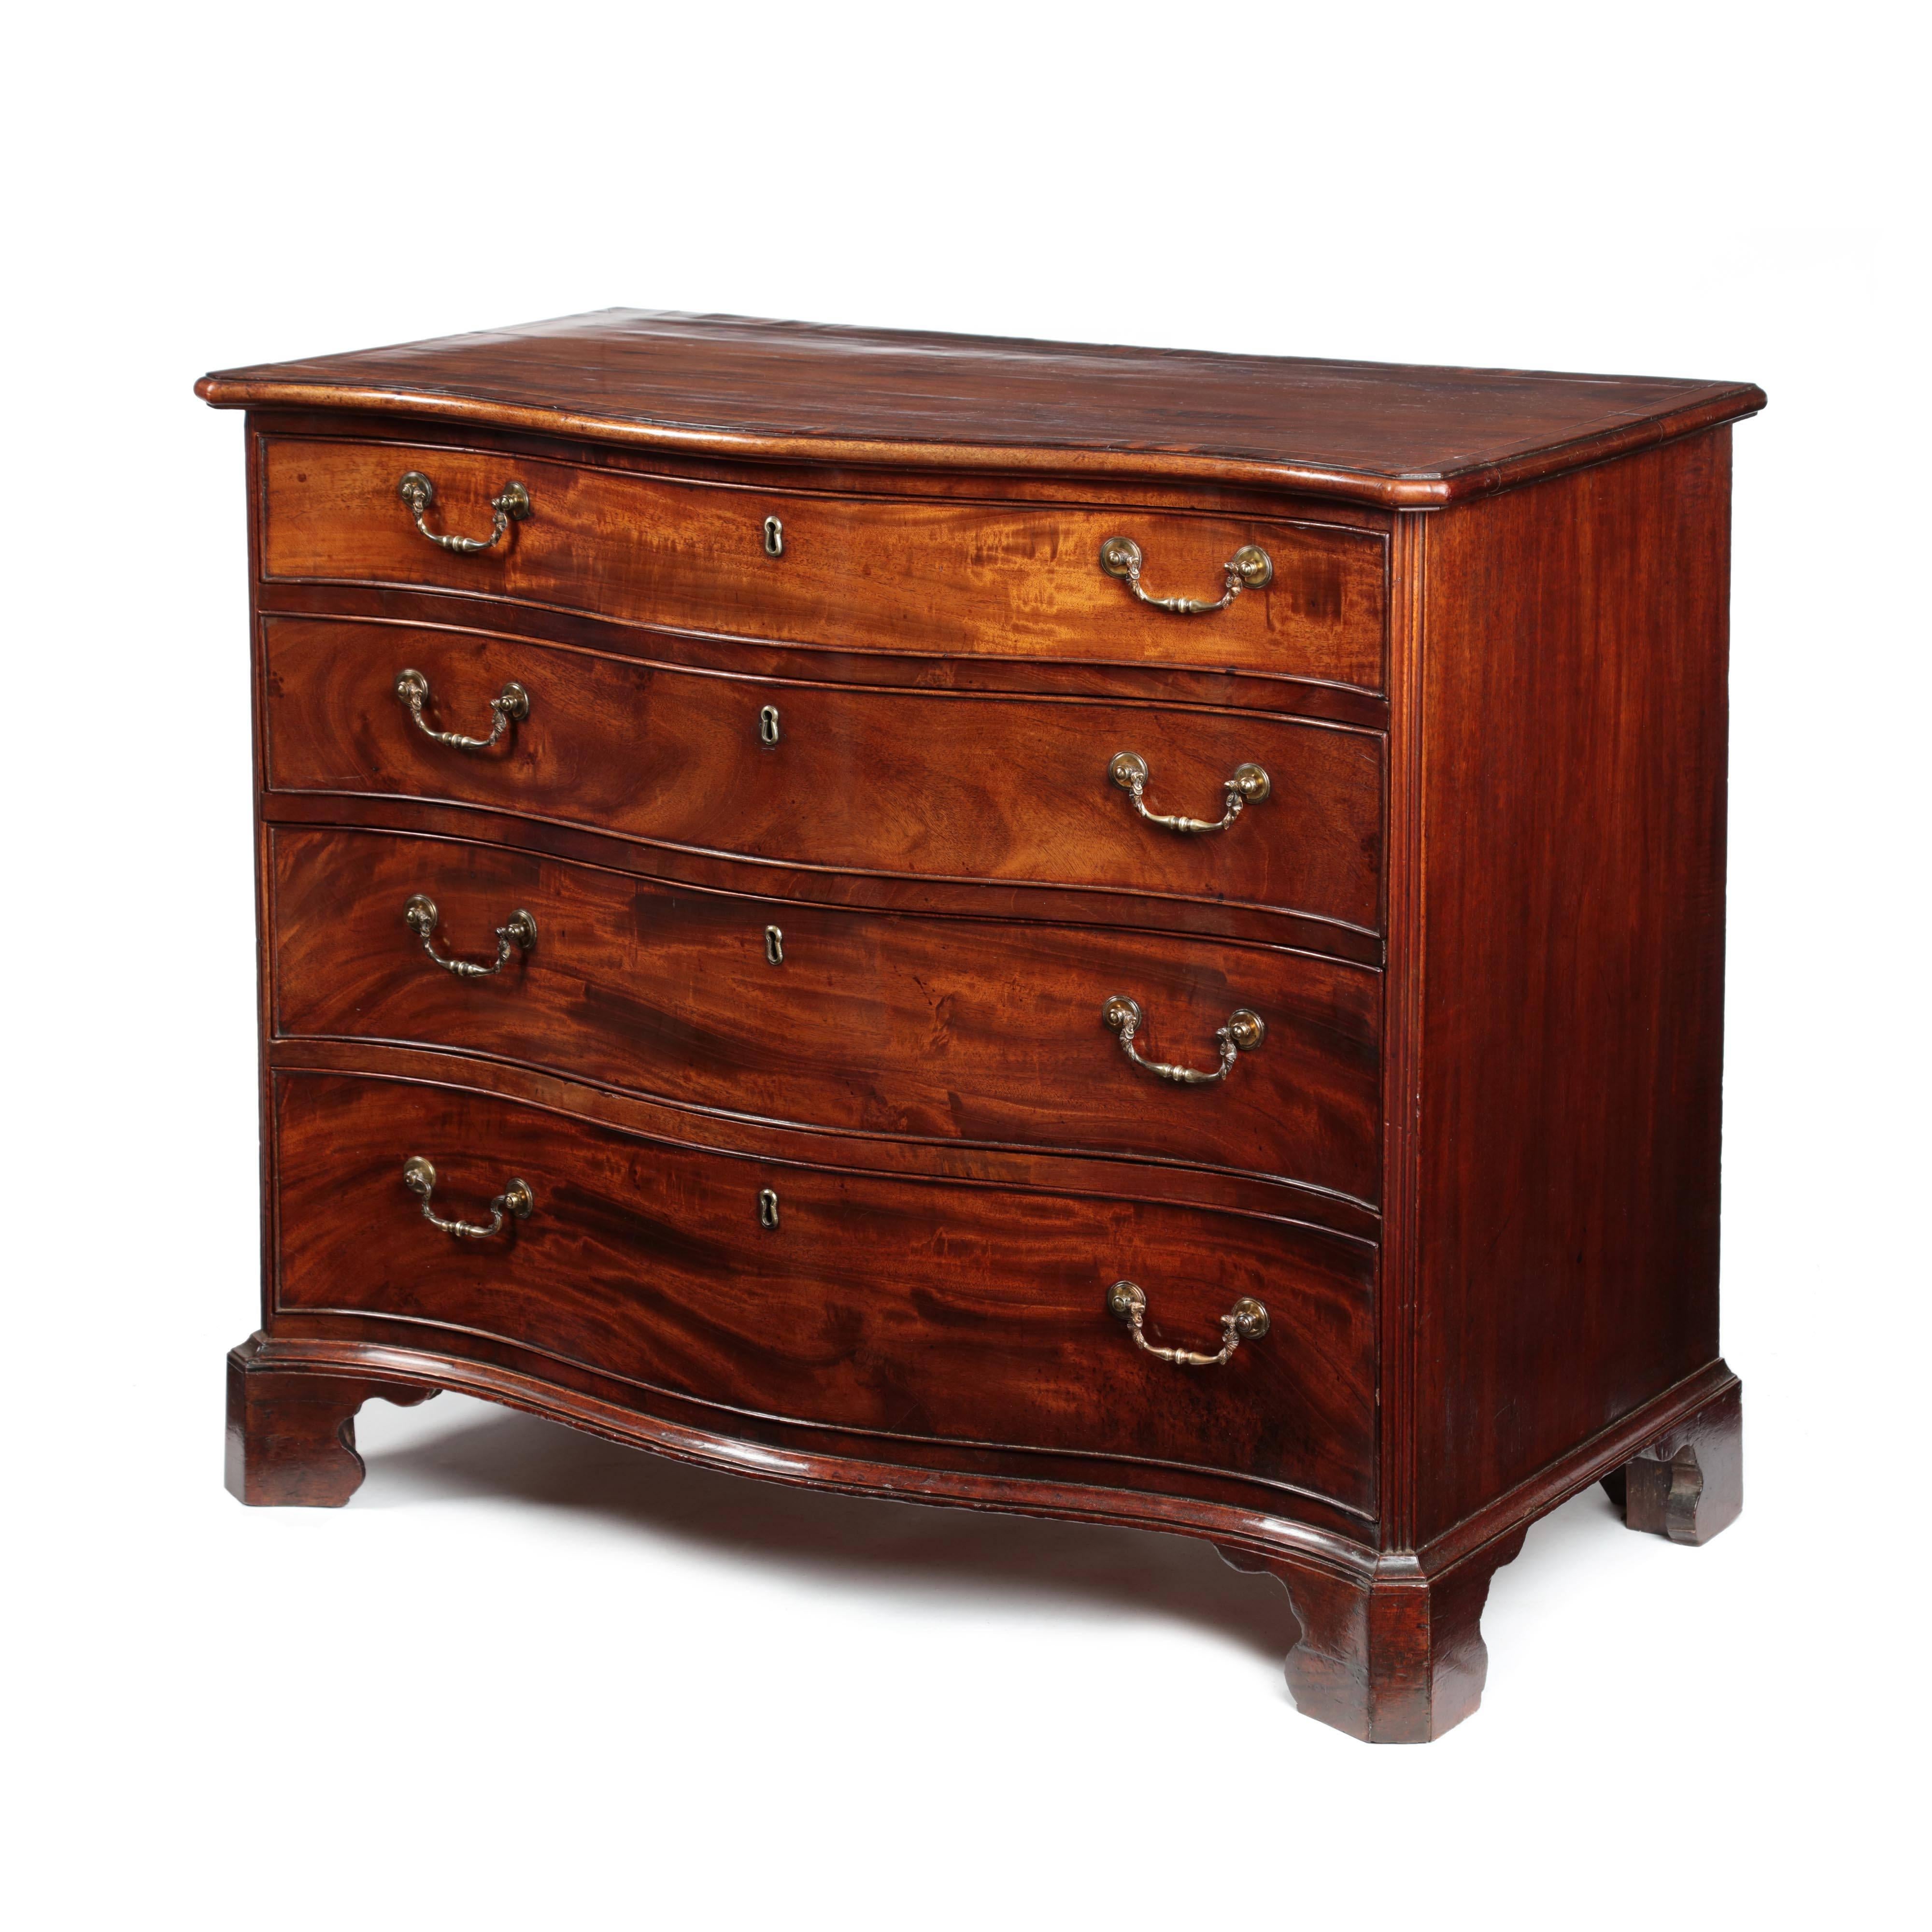 A fine early George III figured mahogany serpentine fronted chest of compact dimensions and of excellent original color and patina. The serpentine fronted top of elegant, cross-banded in flame mahogany with fronted canted corners and a moulded edge.